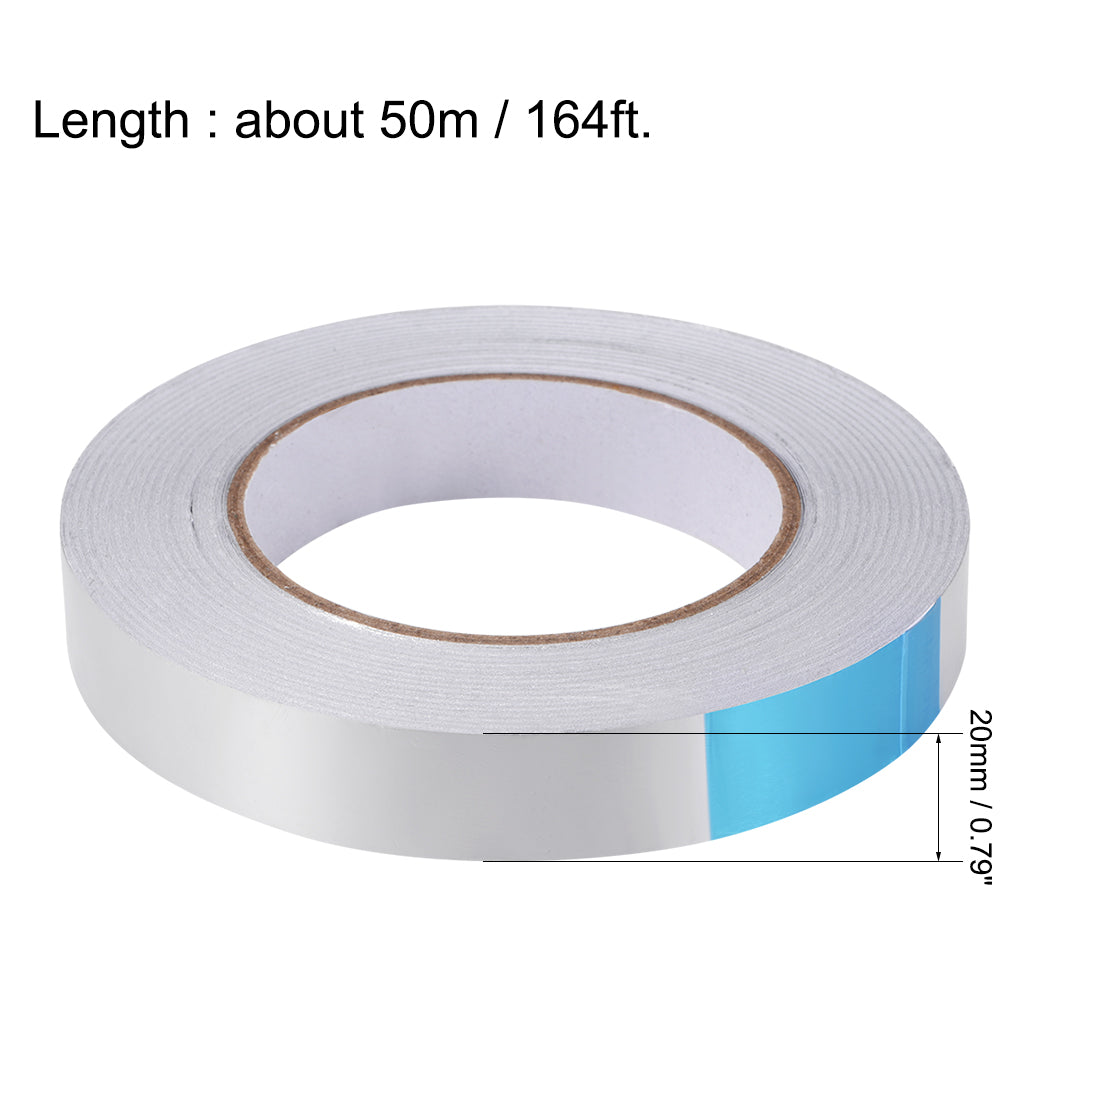 uxcell Uxcell Heat Resistant Tape - High Temperature Heat Transfer Tape Aluminum Foil Adhesive Tape 20mm x 50m(164ft)